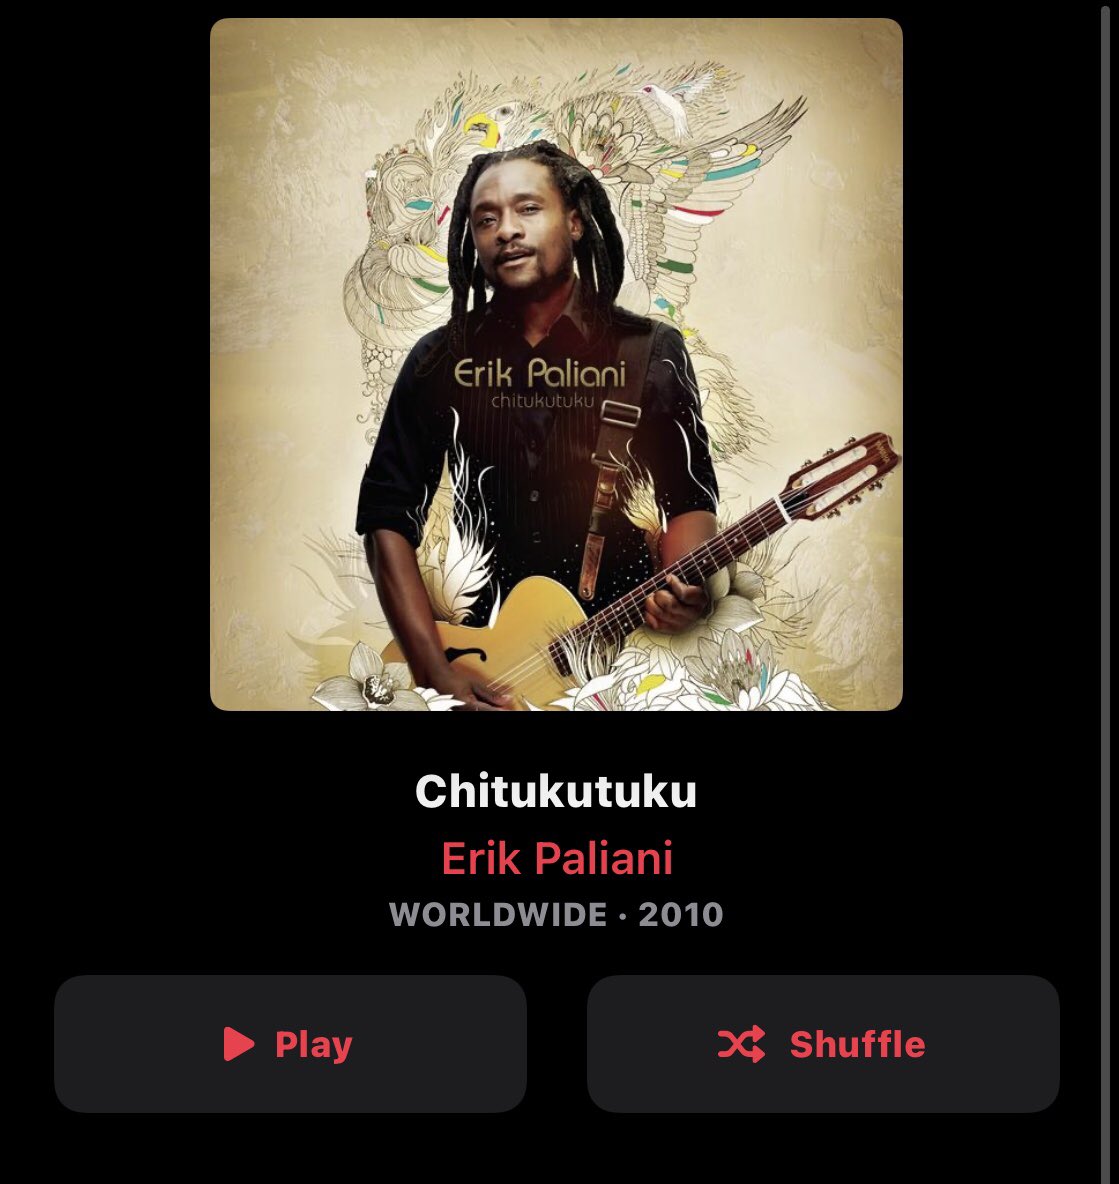 Erik Paliani is no stranger to South Africa. You might remember him from producing Zamajobe’s Ndawo Yami and playing those guitar hooks we still sing along to today. He also produced Hugh Masekela and played with numerous SA musicians including Benjamin Dube.